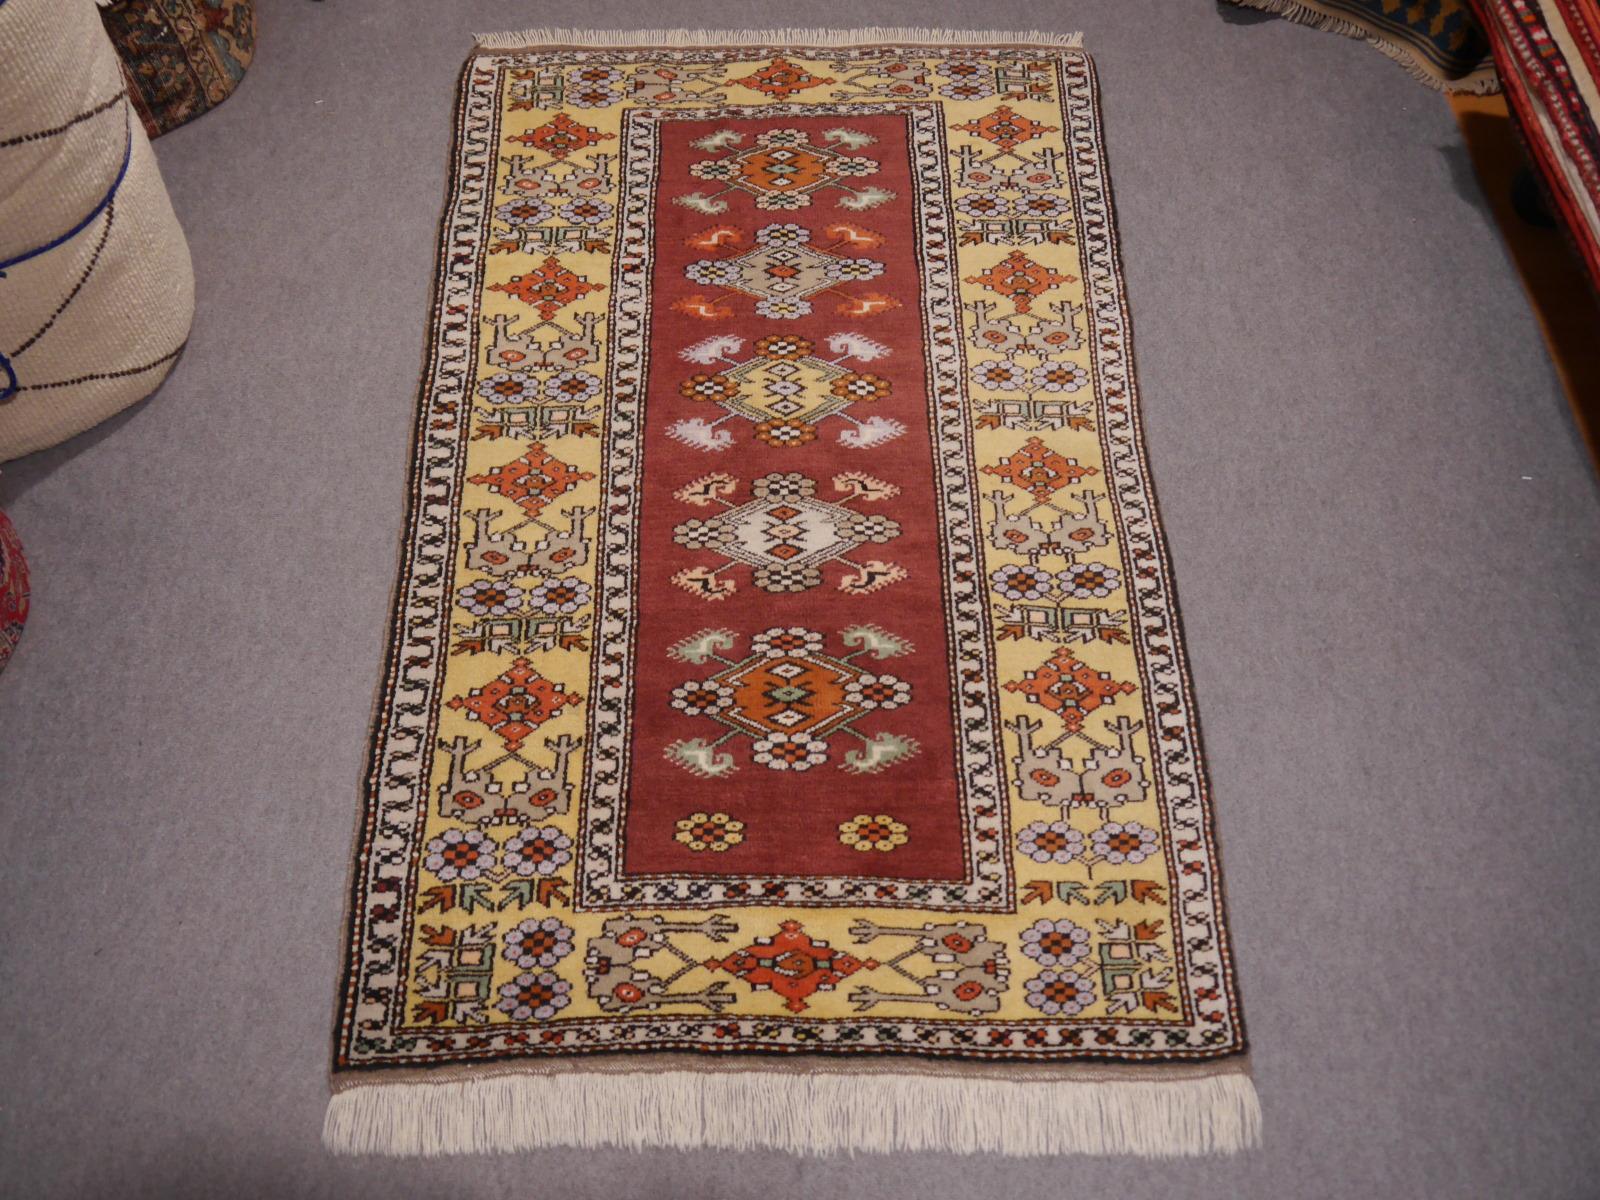 Vintage oriental accent rug - carpet - mat

Vintage Turkish rug excellent condition, rare colors.

• Beautiful vintage rug
• All handmade
• Pile pure wool
• Traditional design
• Condition: Very good.
All of our rugs, carpets and Kilims are original